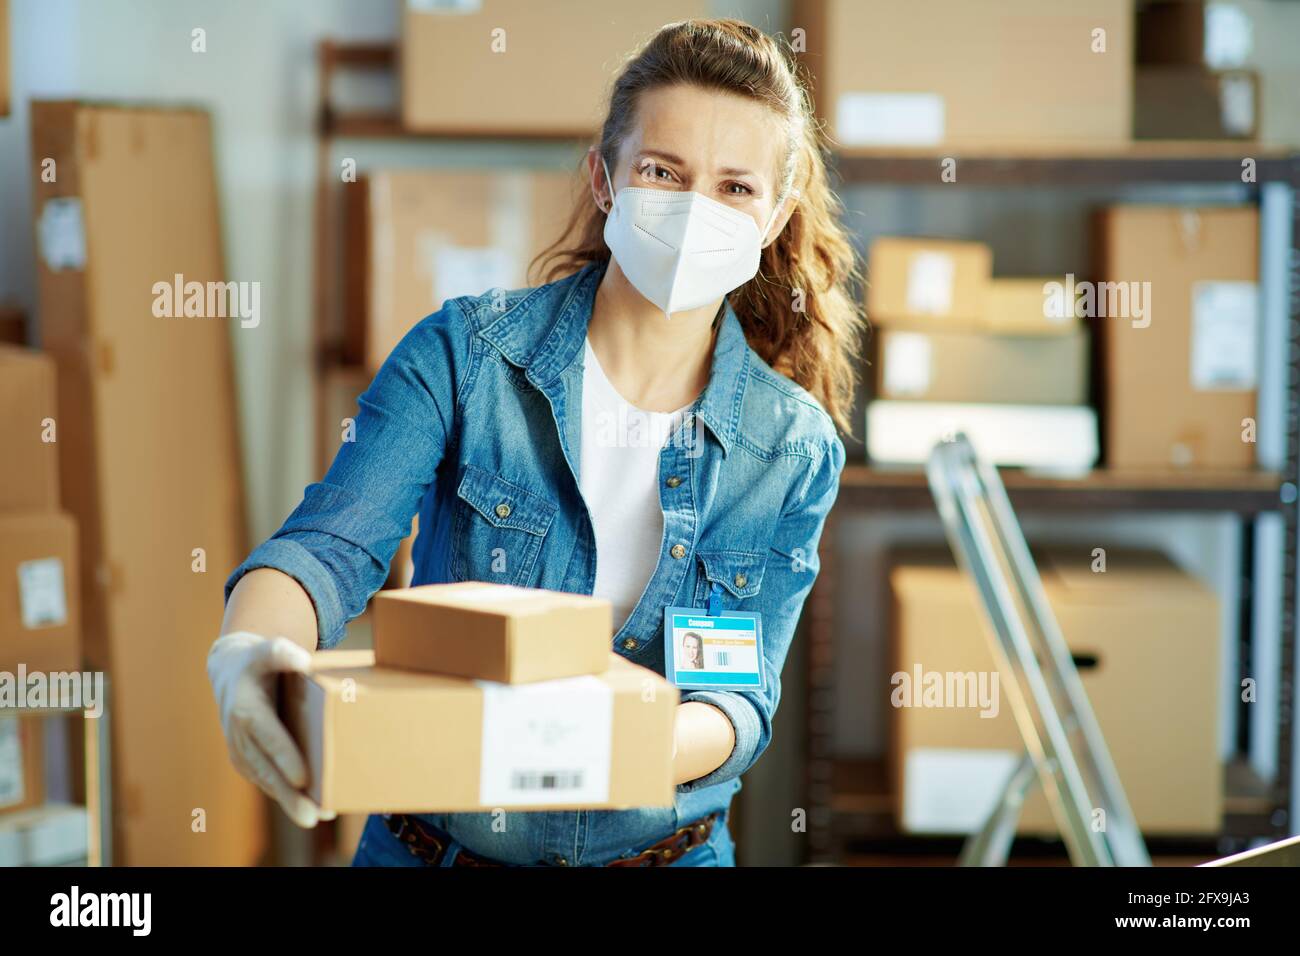 Delivery business. modern female in jeans with ffp2 mask giving parcel in the office. Stock Photo